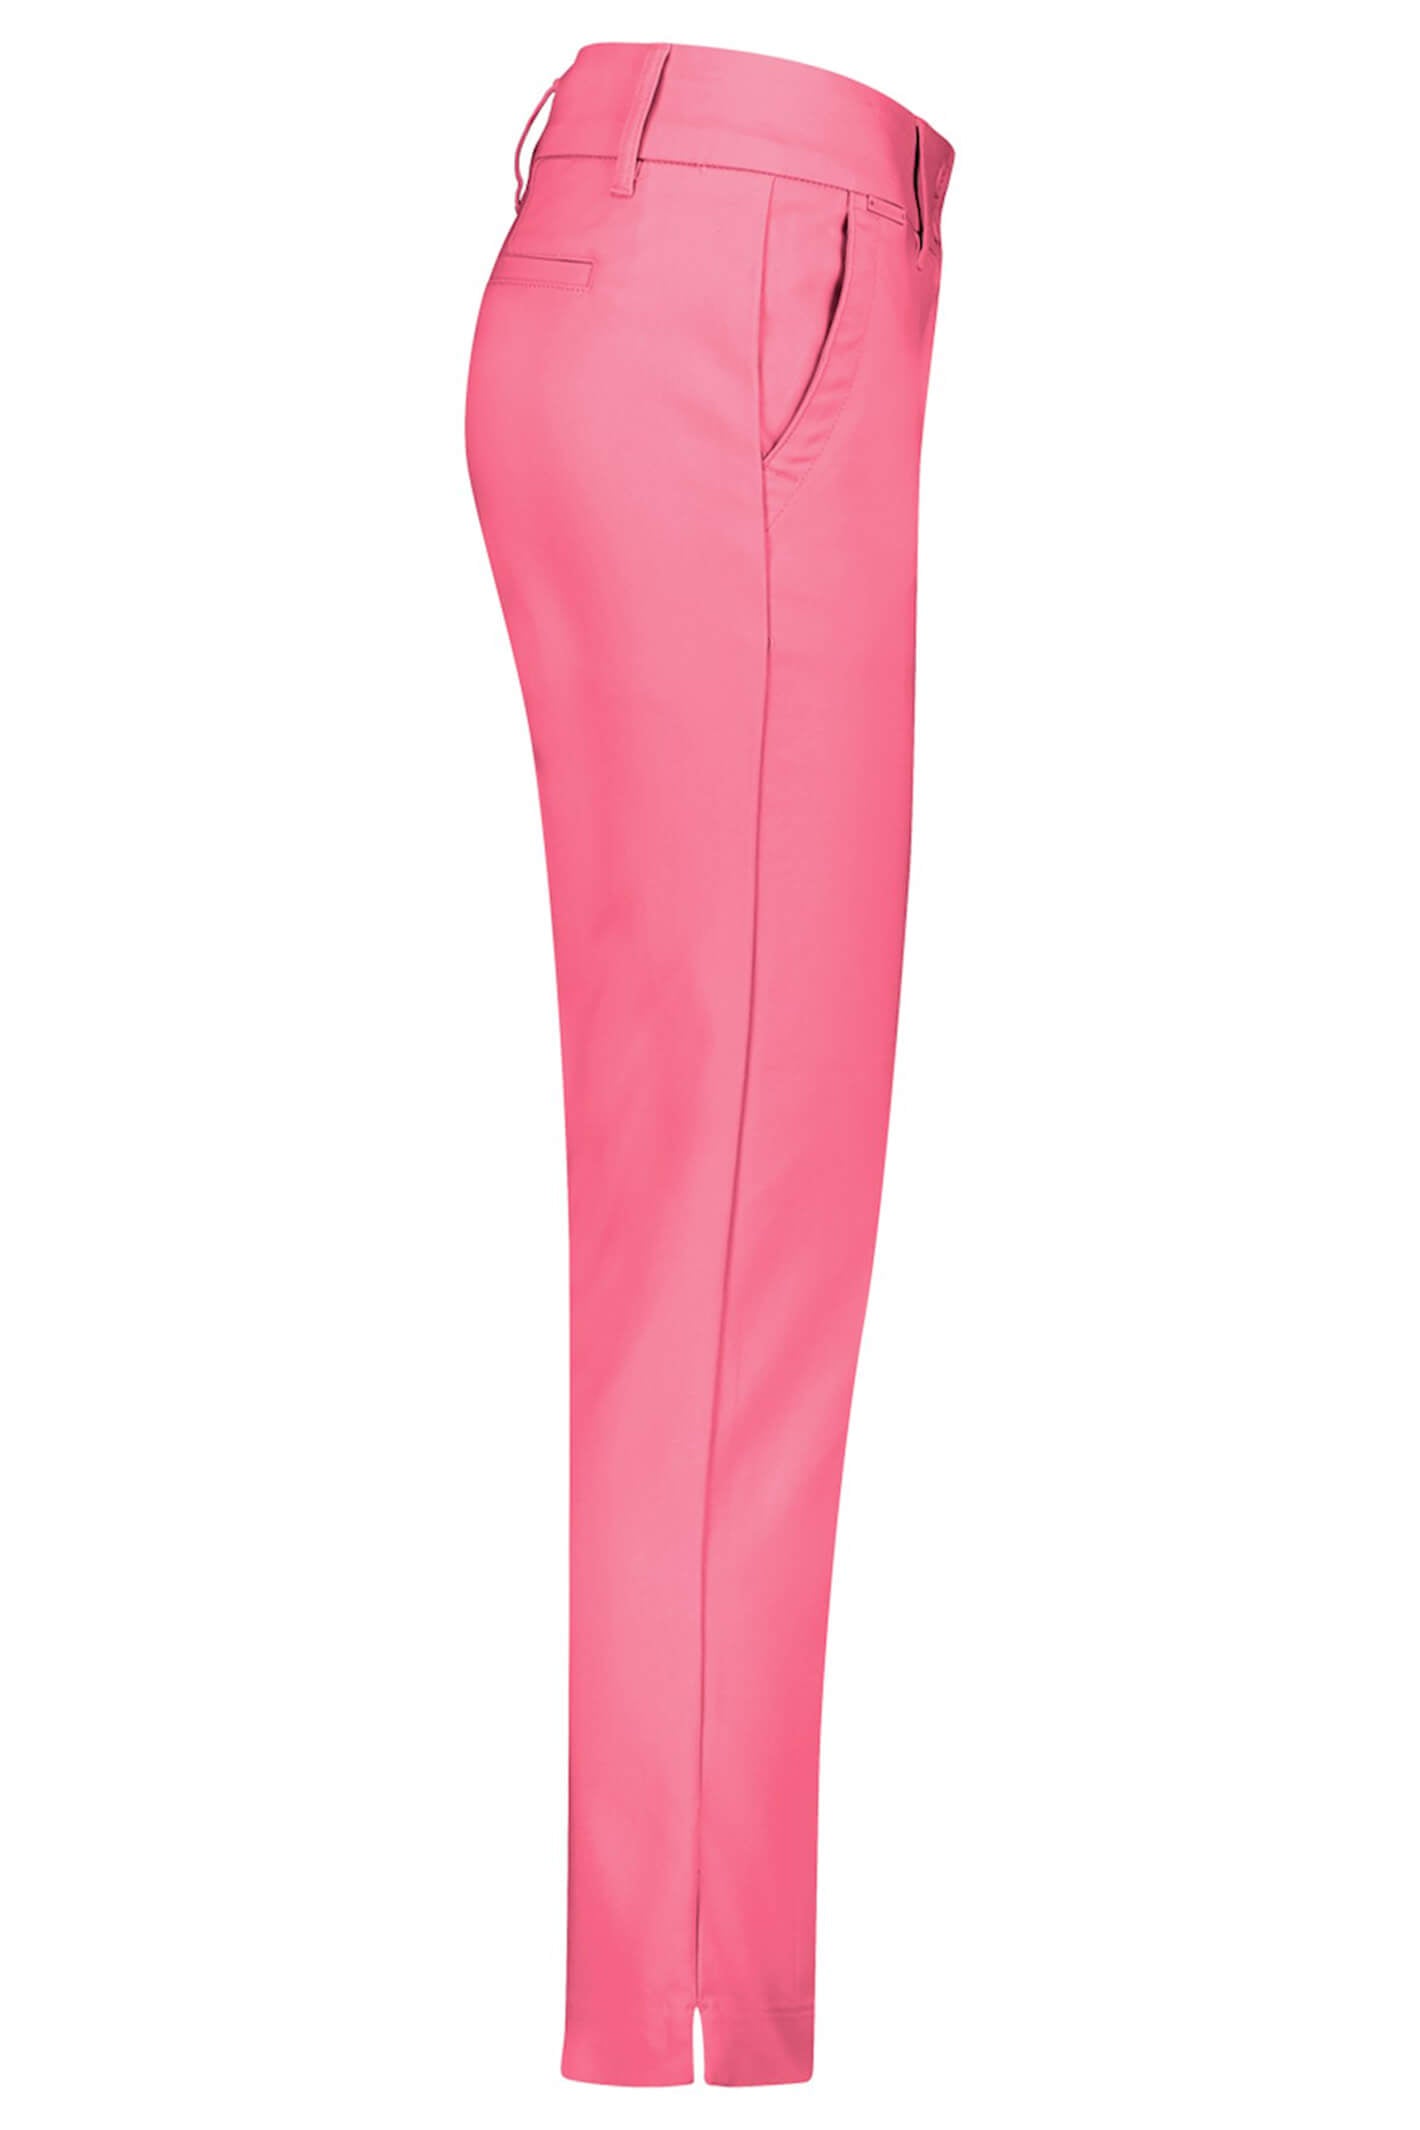 Red Button SRB3944 Diana Pink Smart Colour Trousers